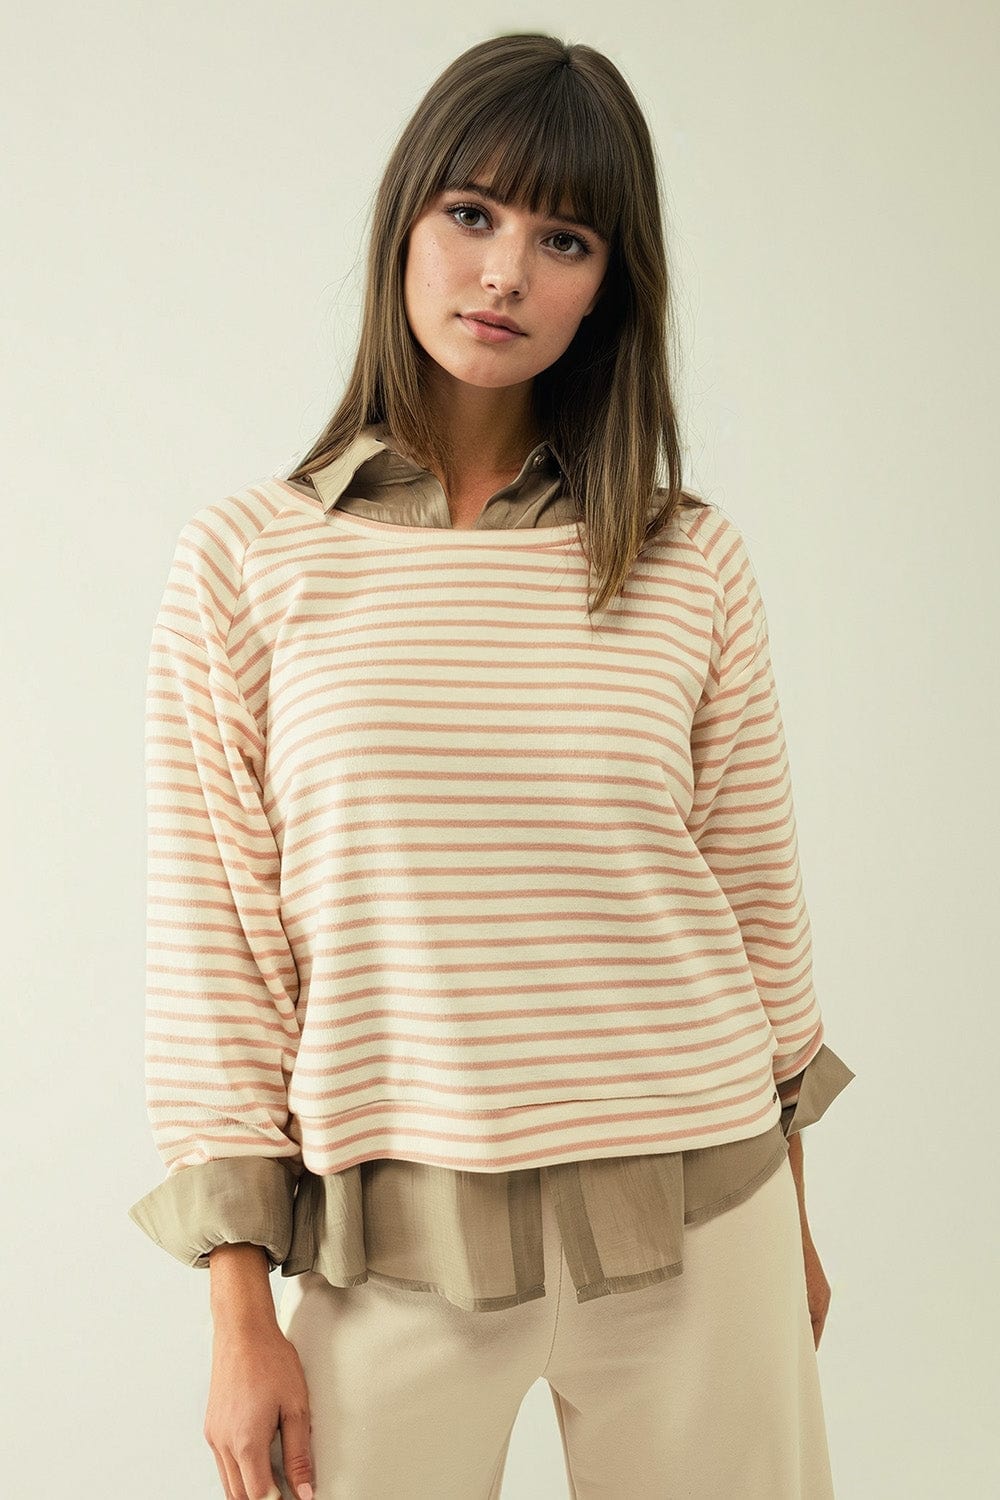 Q2 Women's Sweater Long Sleeves White Sweater With Pink Stripes And A Boat Neck